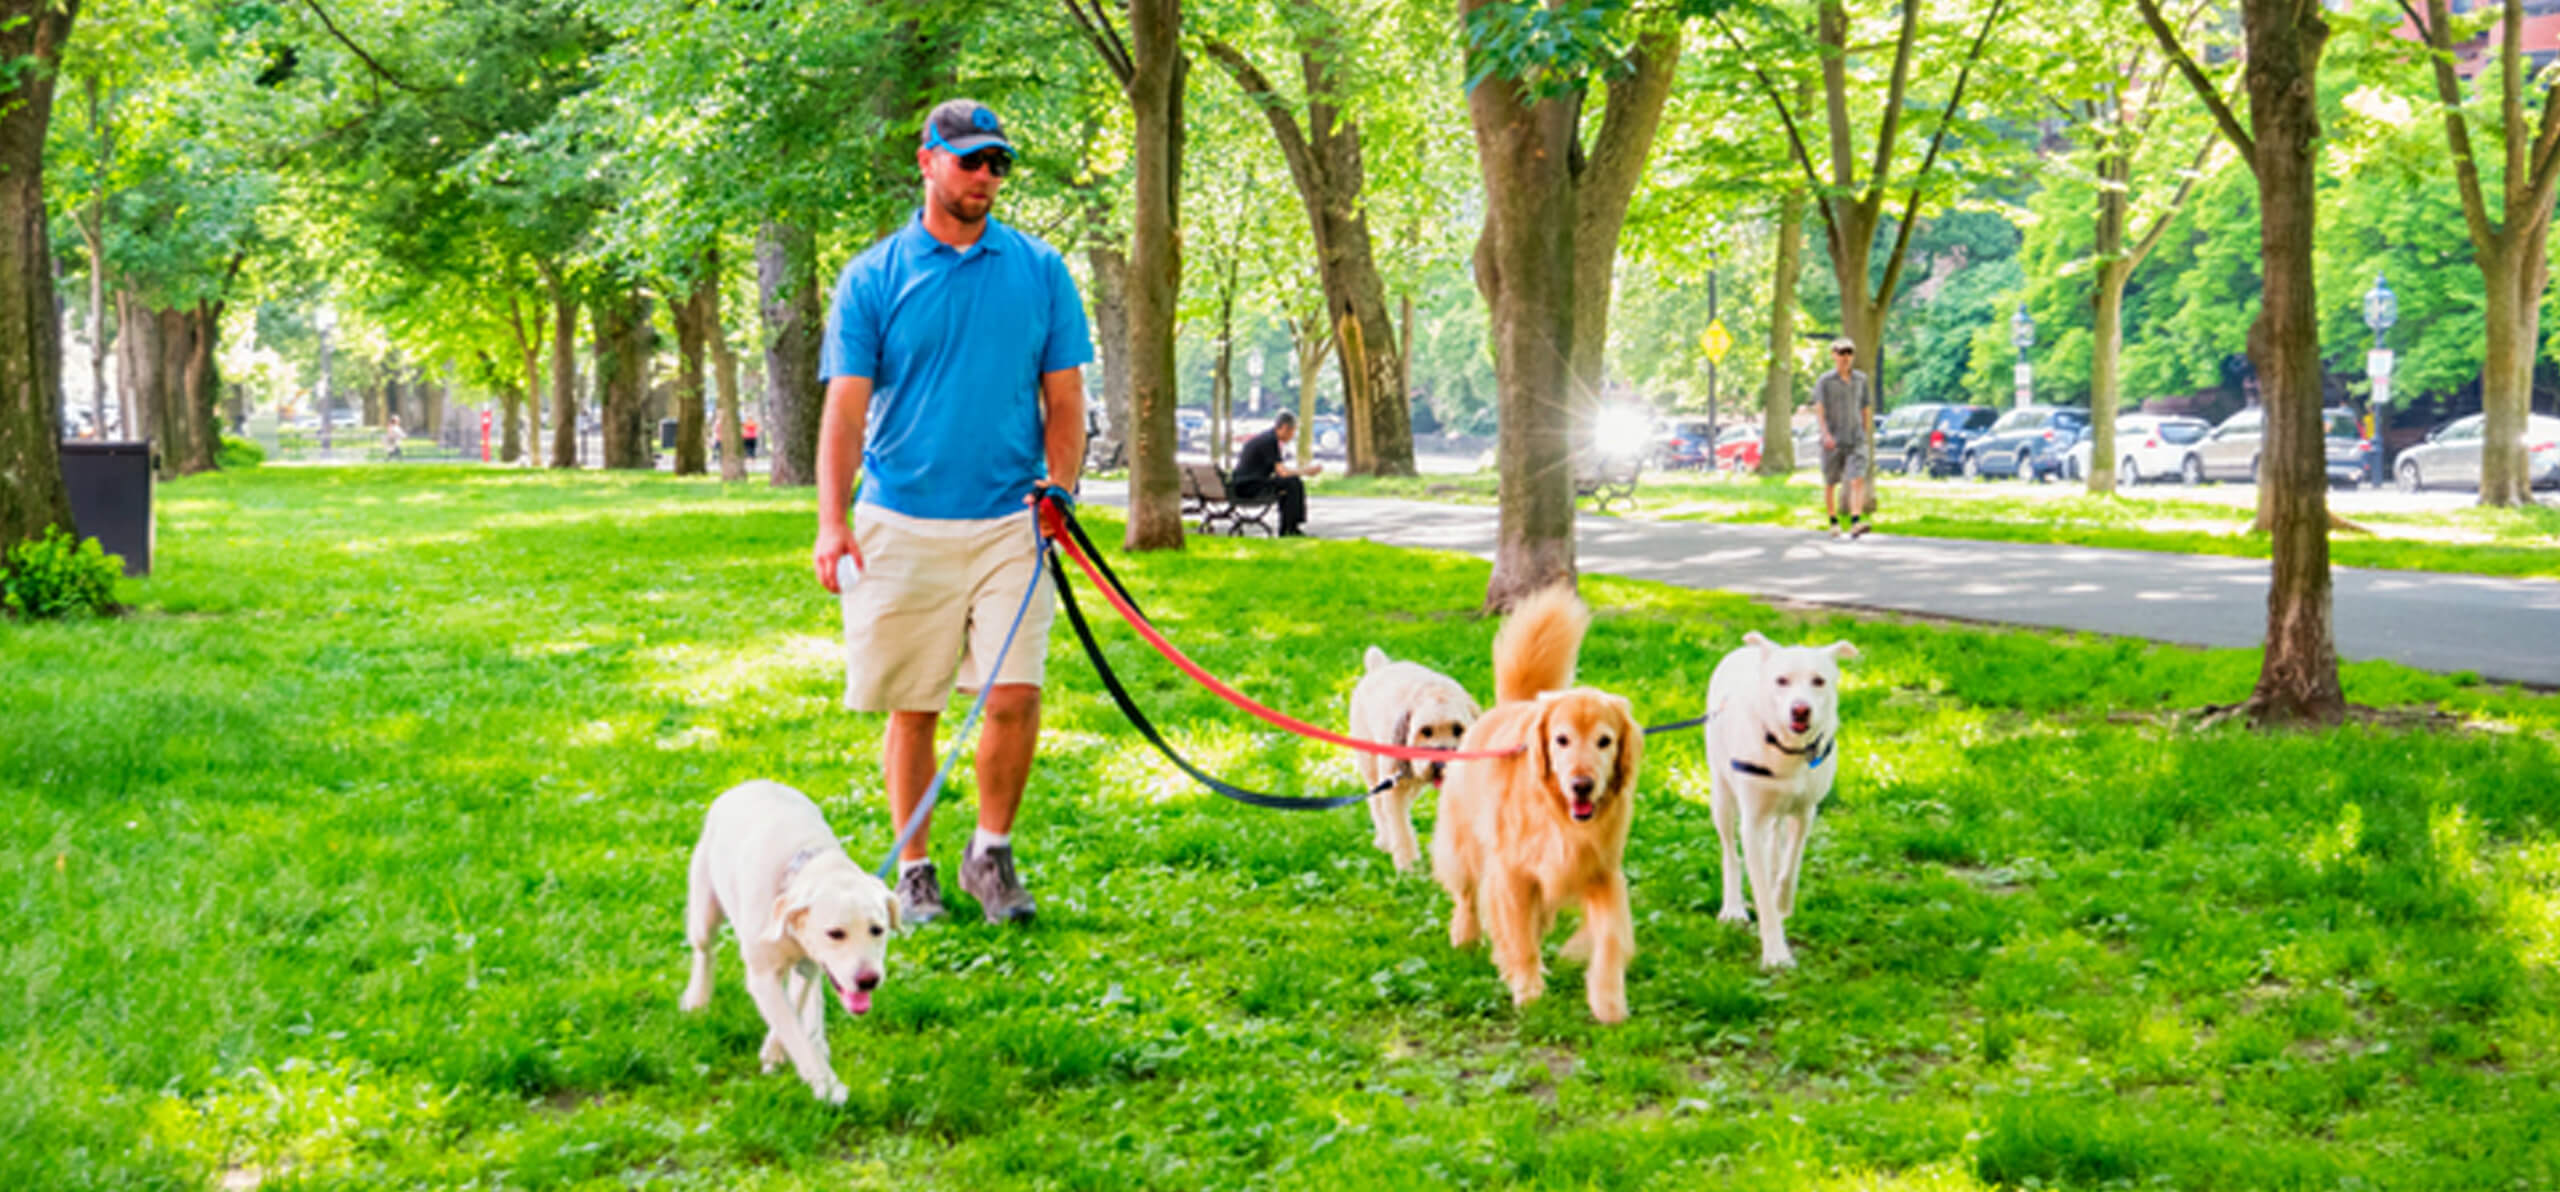 four leashed dogs being walked by an individual over grass